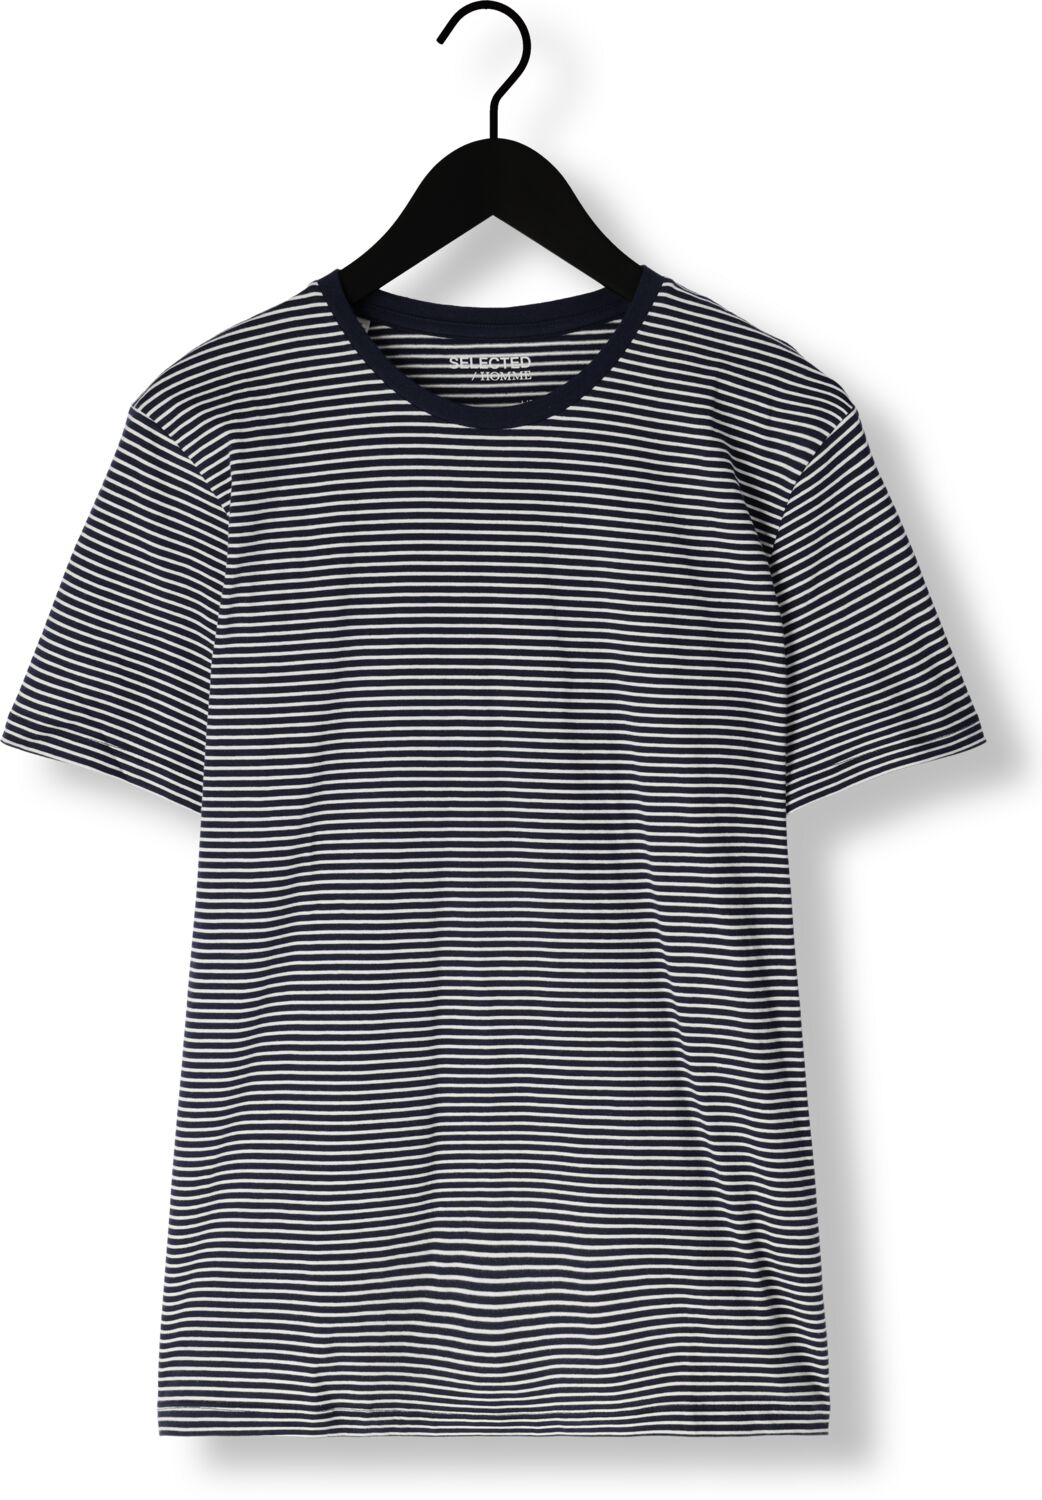 SELECTED HOMME Heren Polo's & T-shirts Slhaspen Stripe Ss O-neck Tee Noos Blauw wit Gestreept